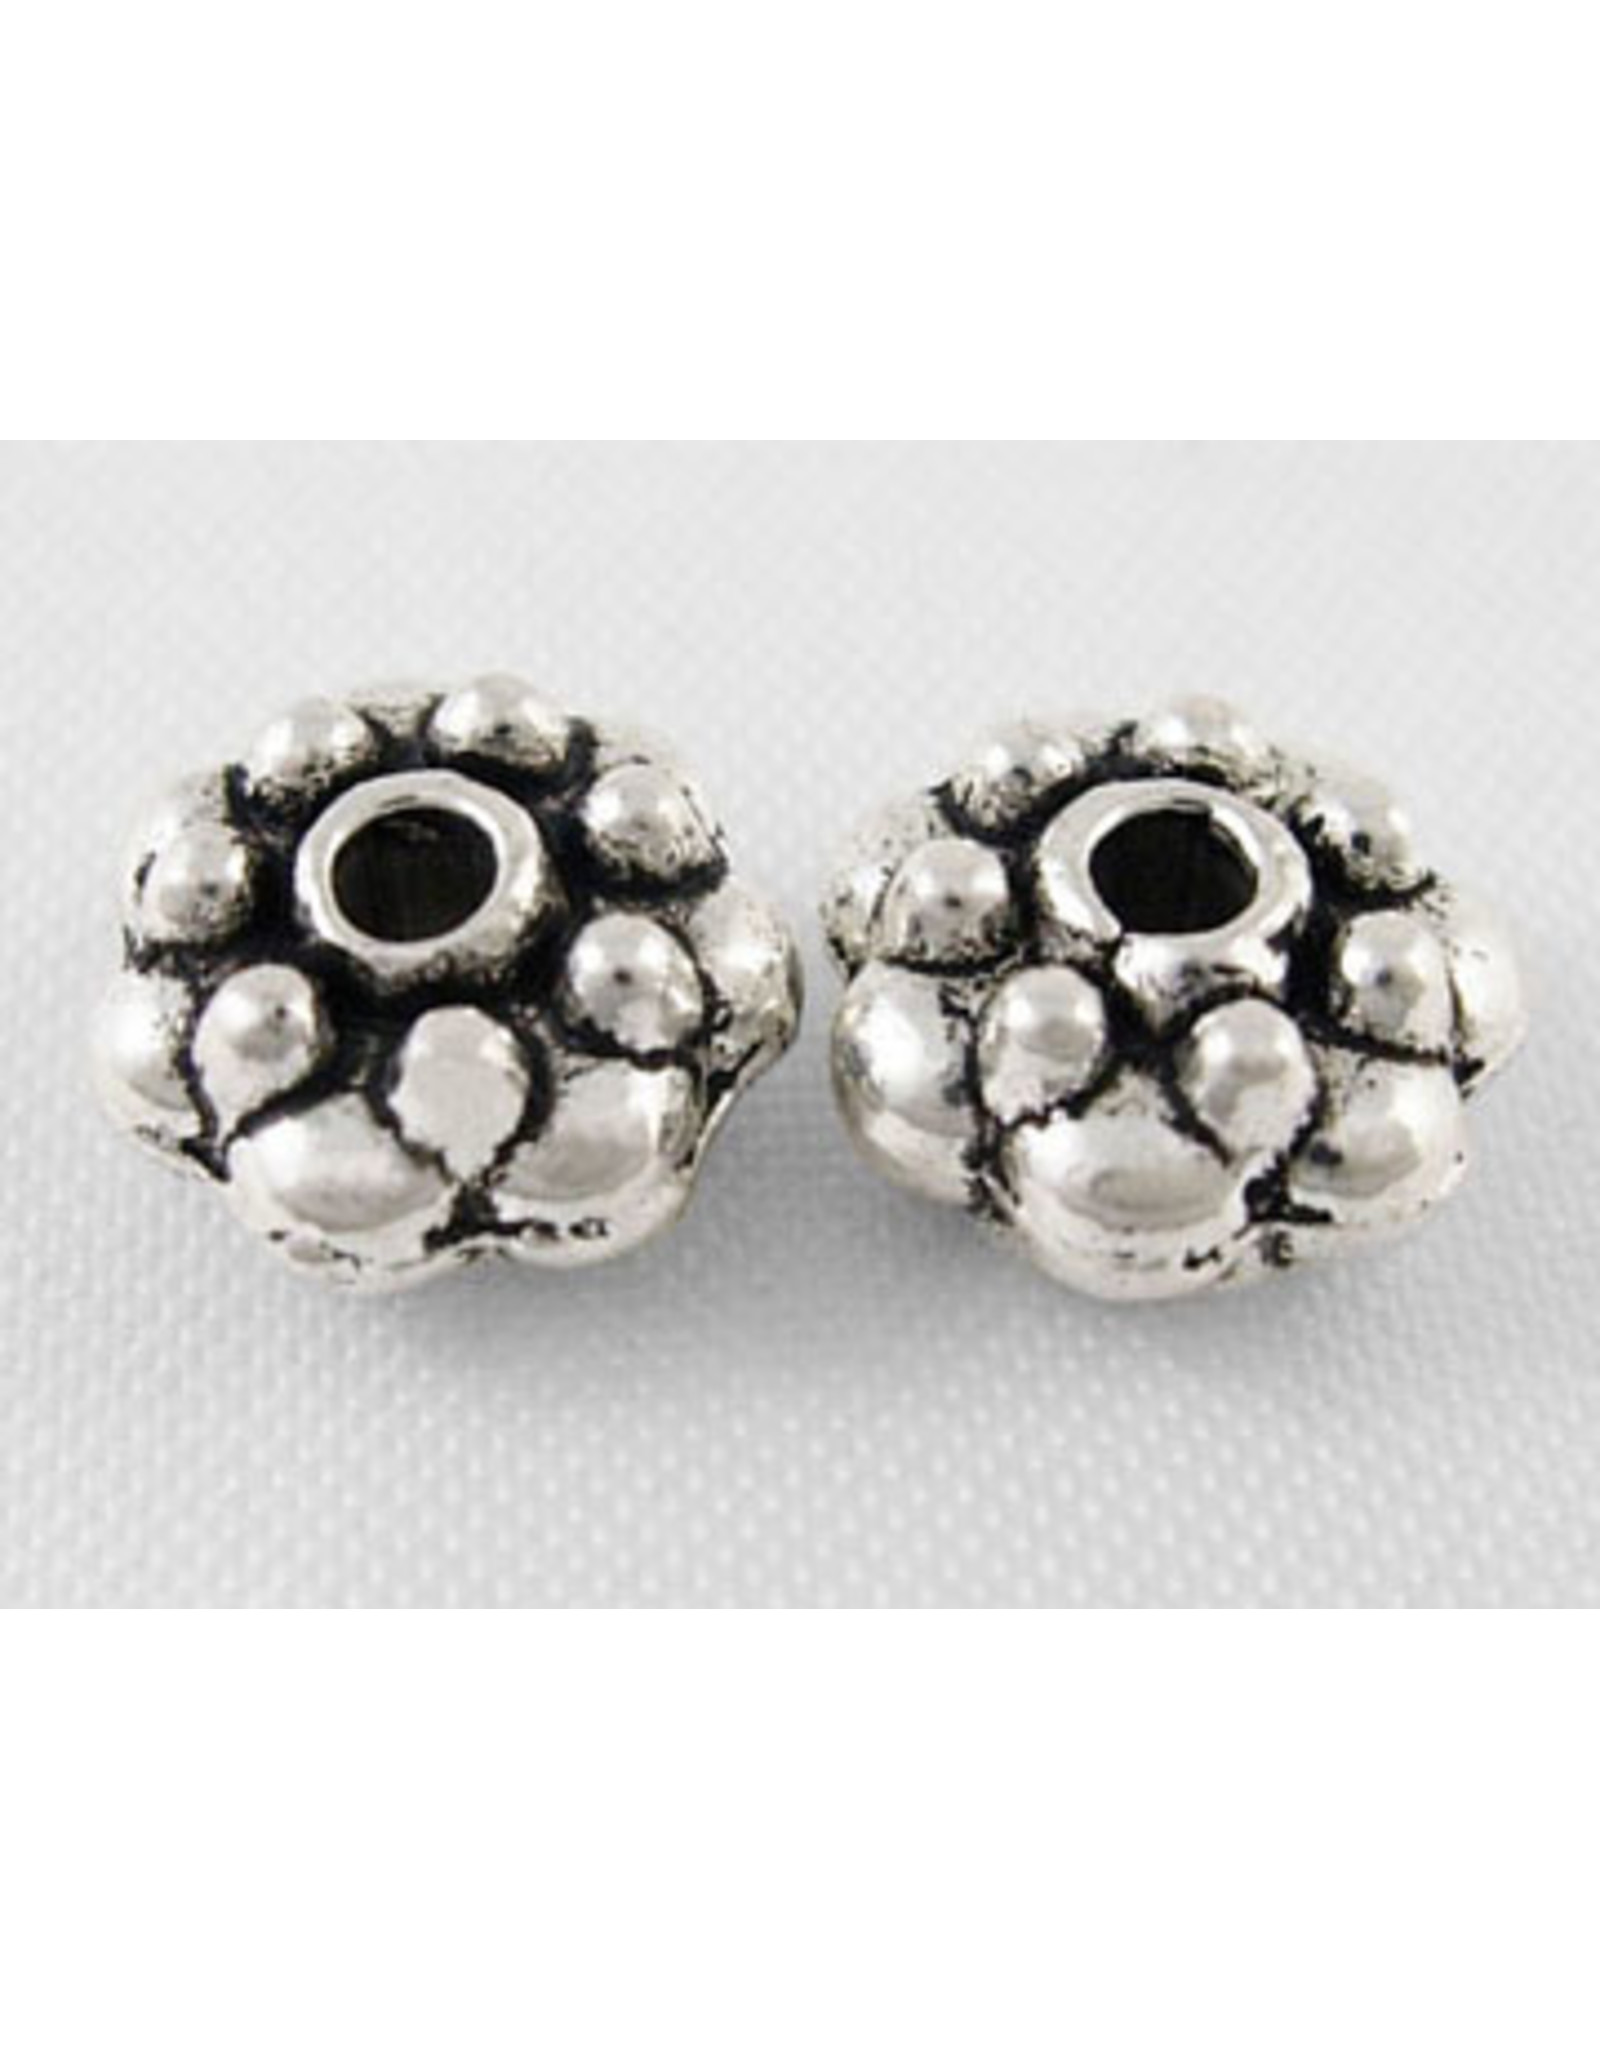 Spacer Bead Antique Silver 8mm  x10